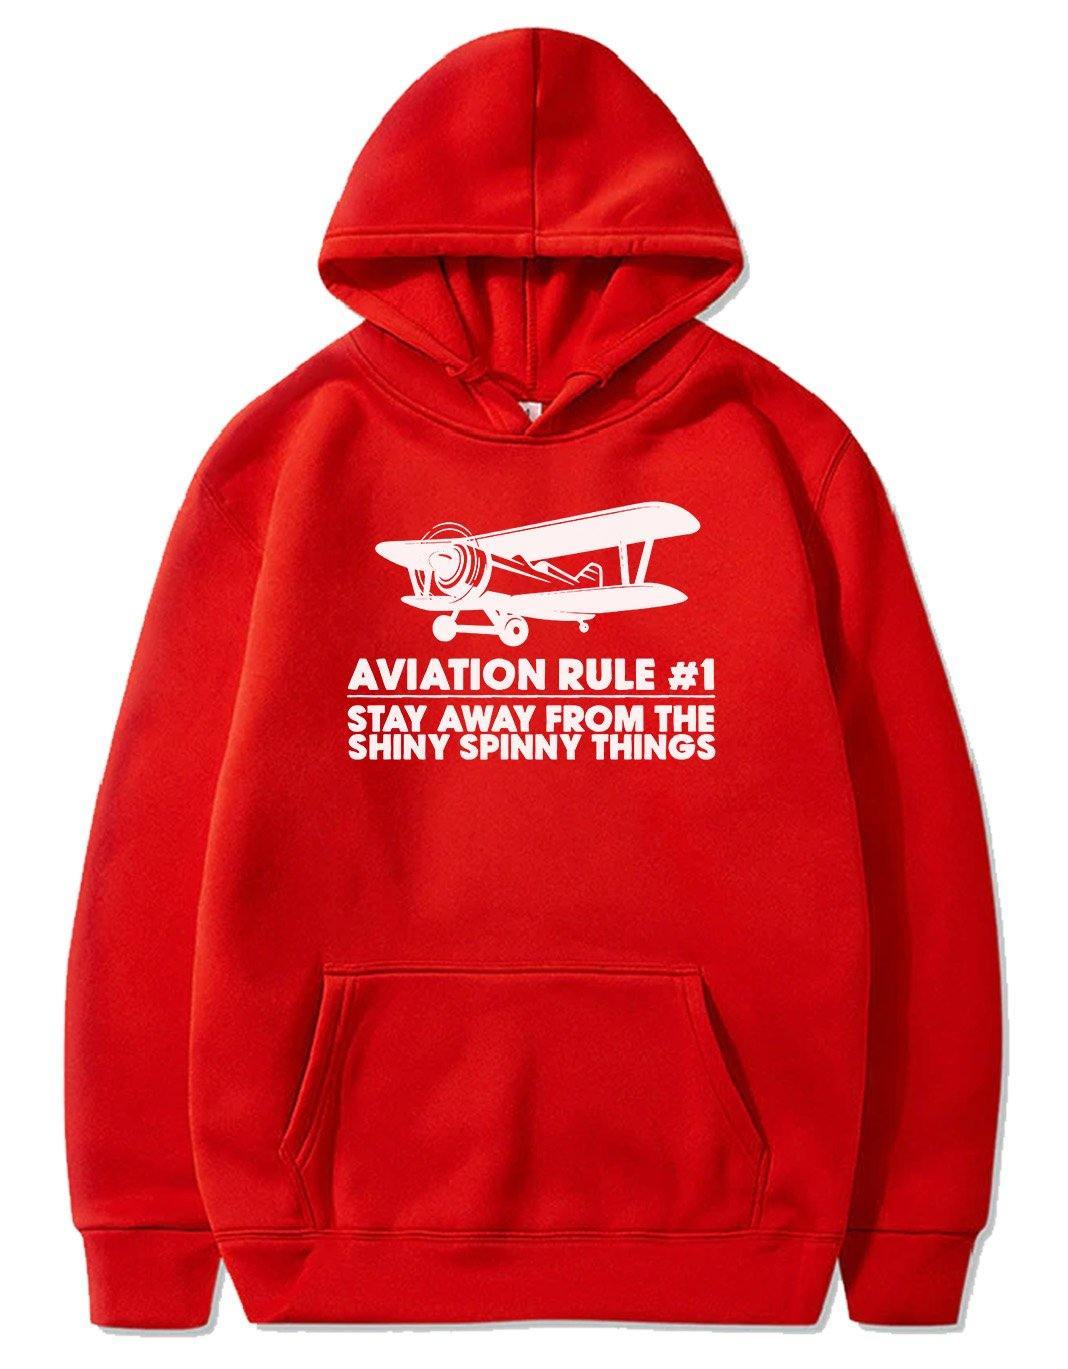 AVIATION RULE #1 STAY ALWAYS FROM THE SHINY SPINNY THINGS PULLOVER THE AV8R